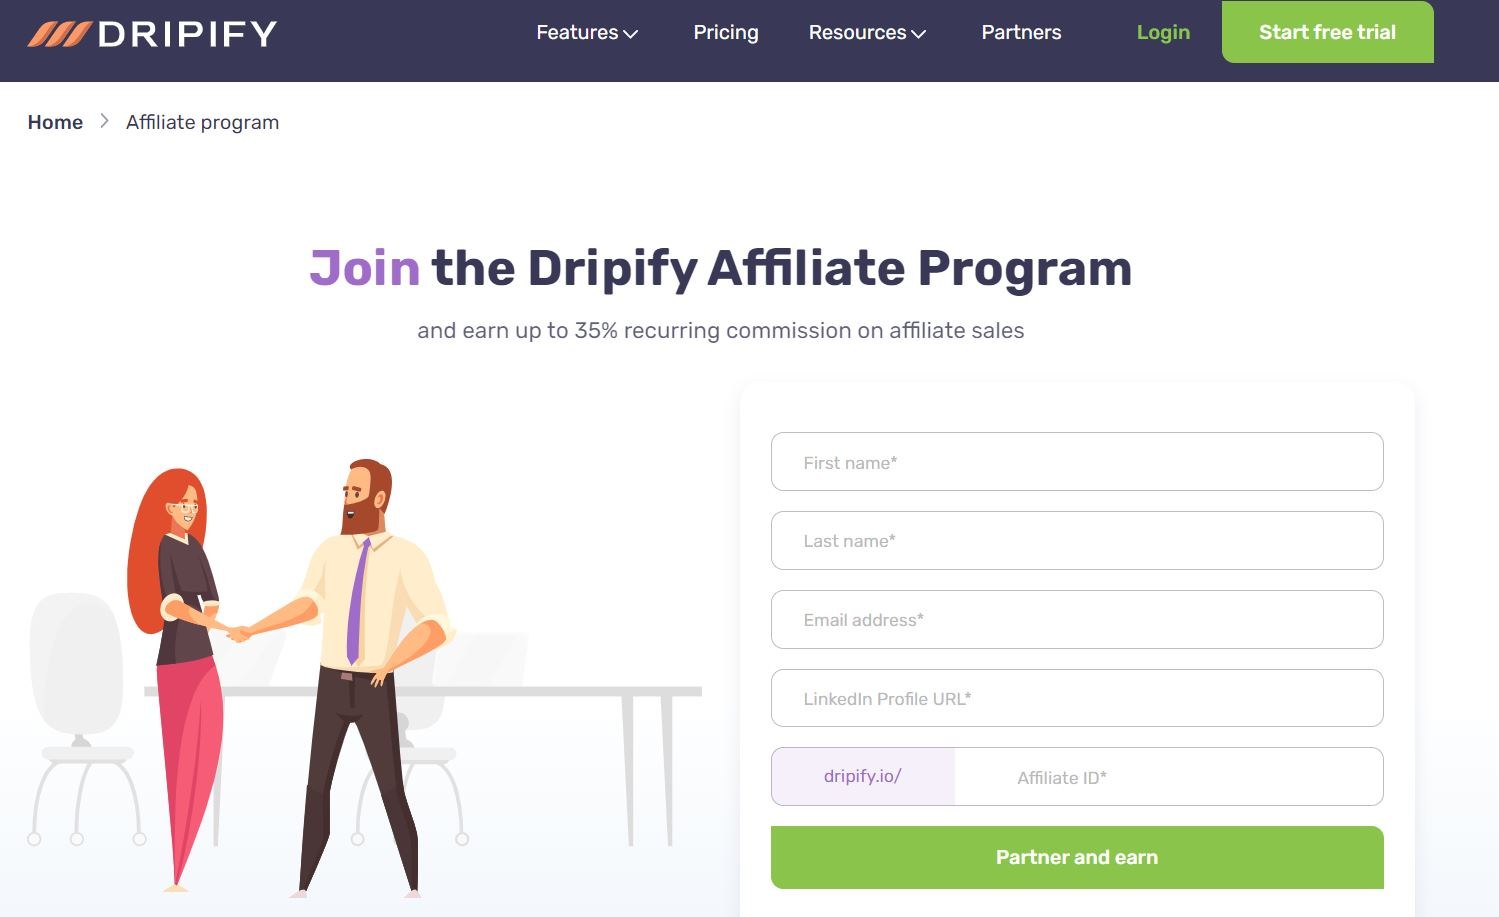 An example of an affiliate program application